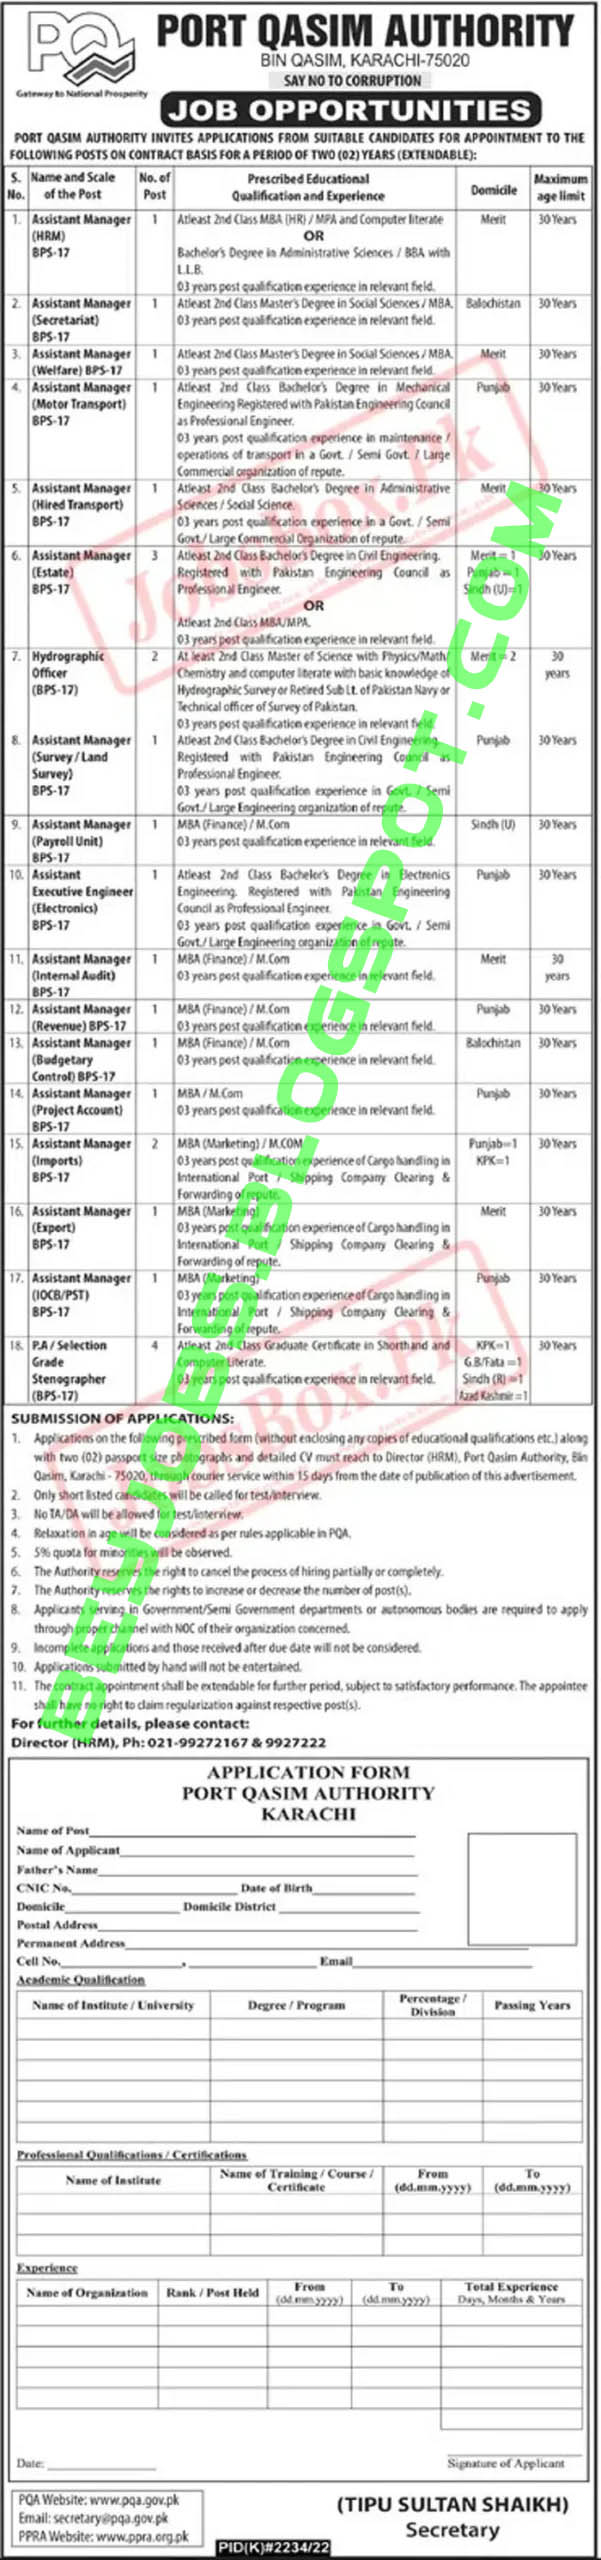 Port Qasim Authority In Karachi has announced latest new govt jobs for 31 different positions only Sindh residents are eligible for these jobs.